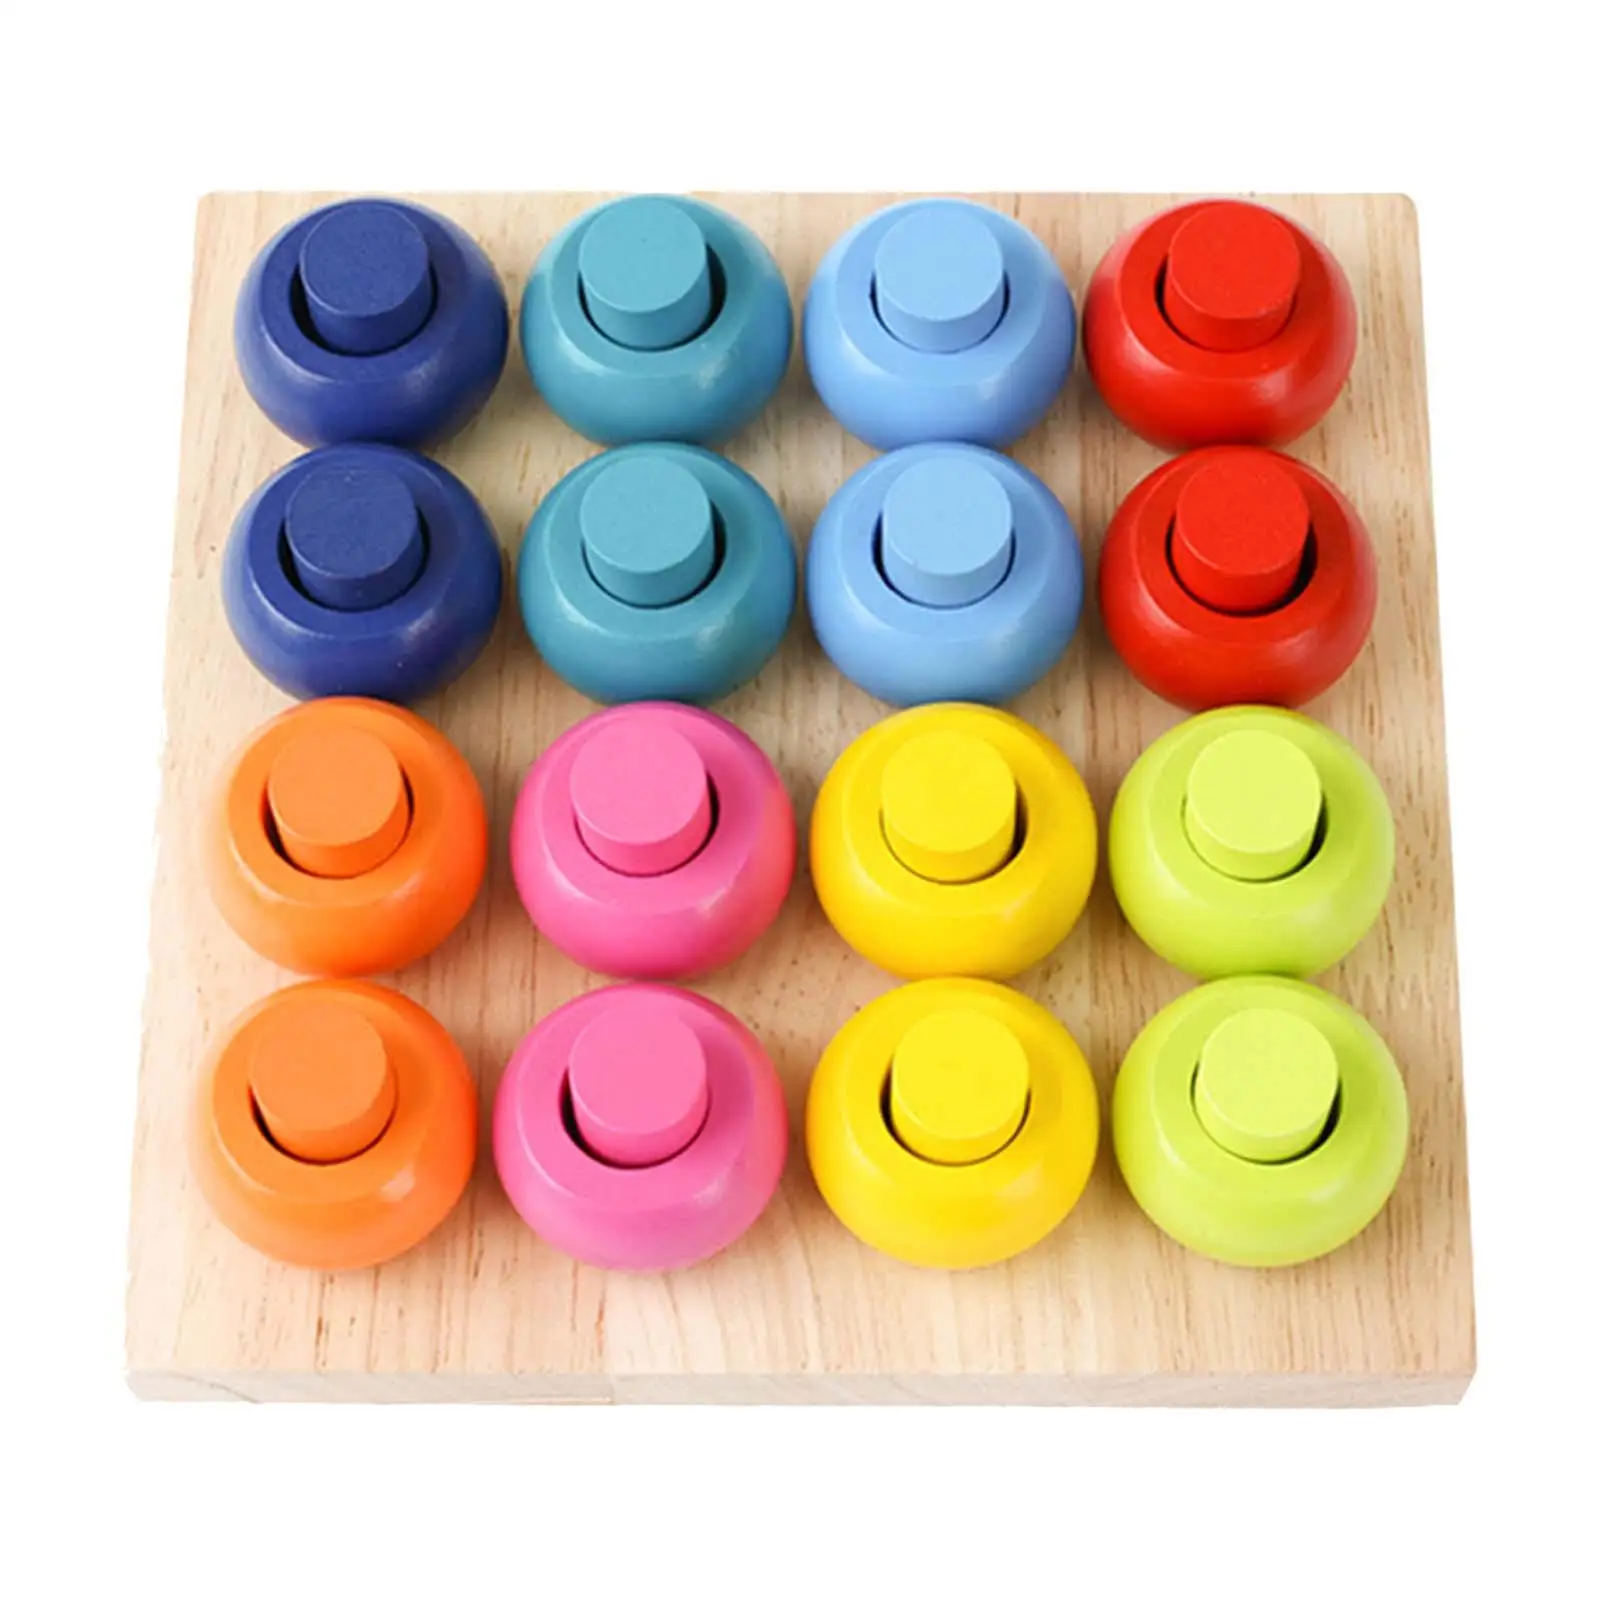 Pegs rings Stacker Educational Cognitive Colour Sorting Puzzle Baby Preschool